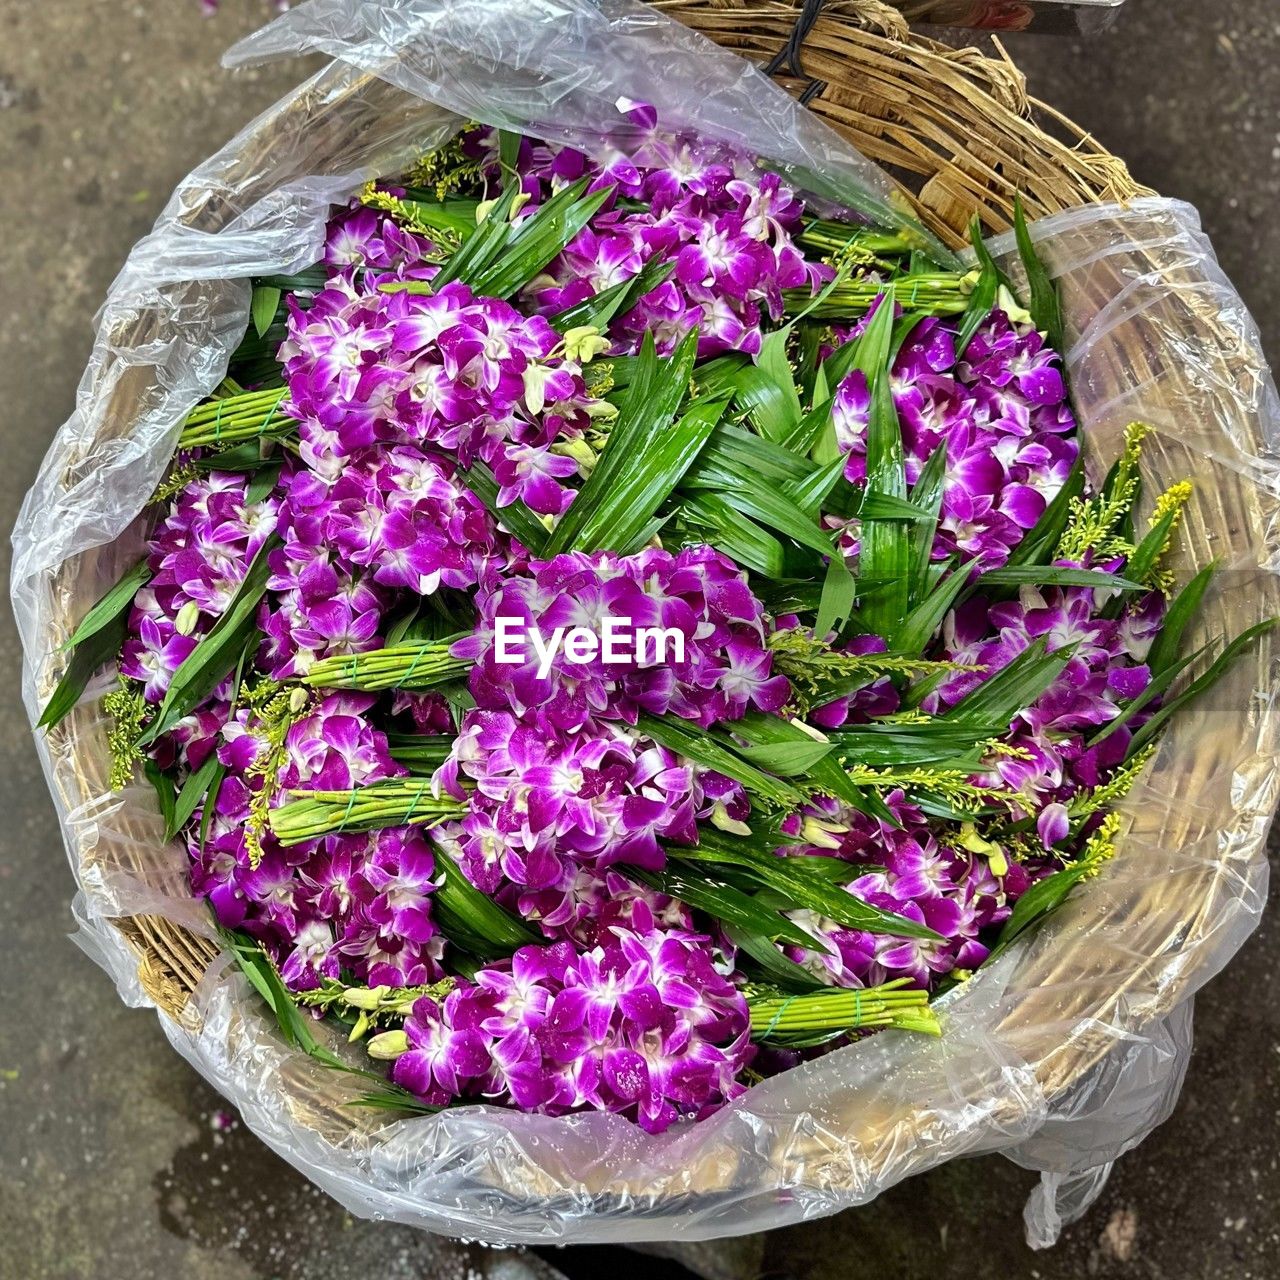 basket, flower, freshness, container, high angle view, flowering plant, purple, floristry, food, food and drink, wellbeing, wicker, bouquet, healthy eating, plant, vegetable, no people, lilac, lavender, still life, floral design, directly above, nature, for sale, close-up, day, large group of objects, retail